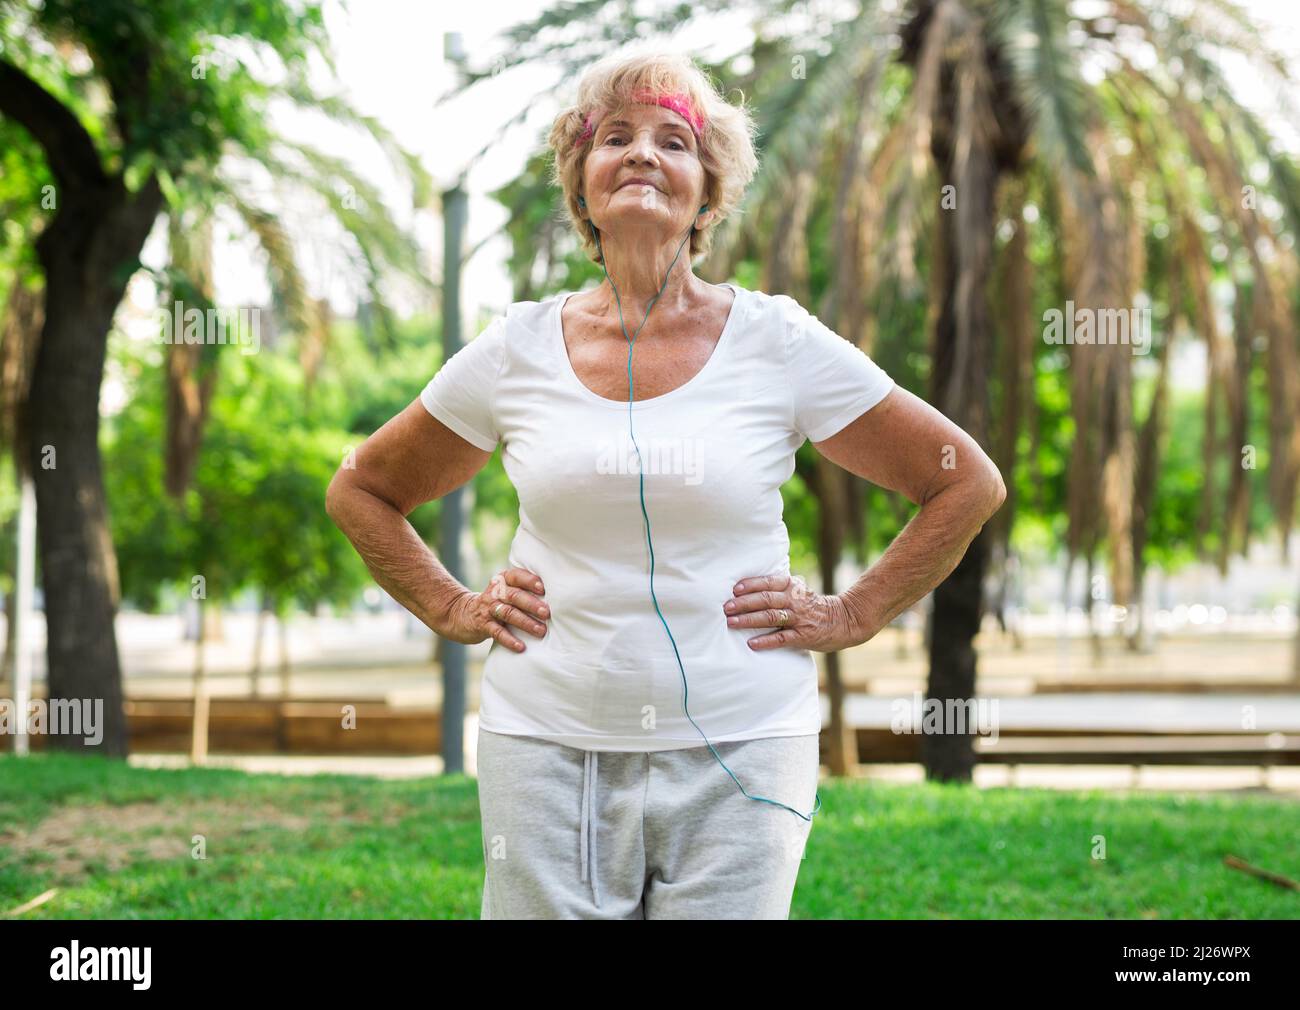 Mature woman training in park Stock Photo